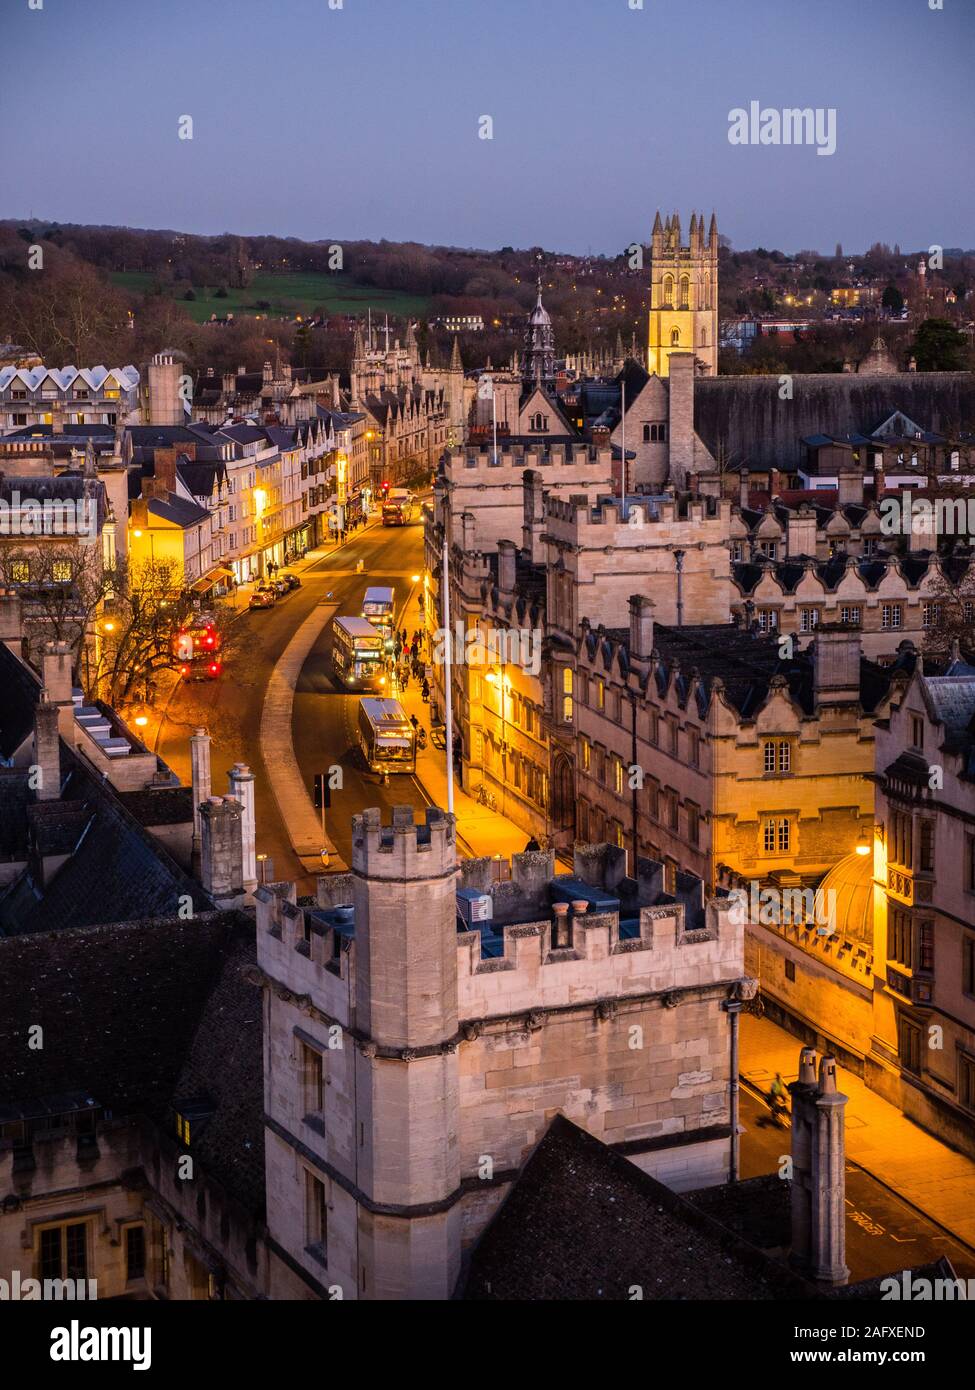 Magdalen Tower, Magdalen College, and The High Street, Night Time Landscape, Oxford University, Oxford, Oxfordshire, England, UK, GB. Stock Photo